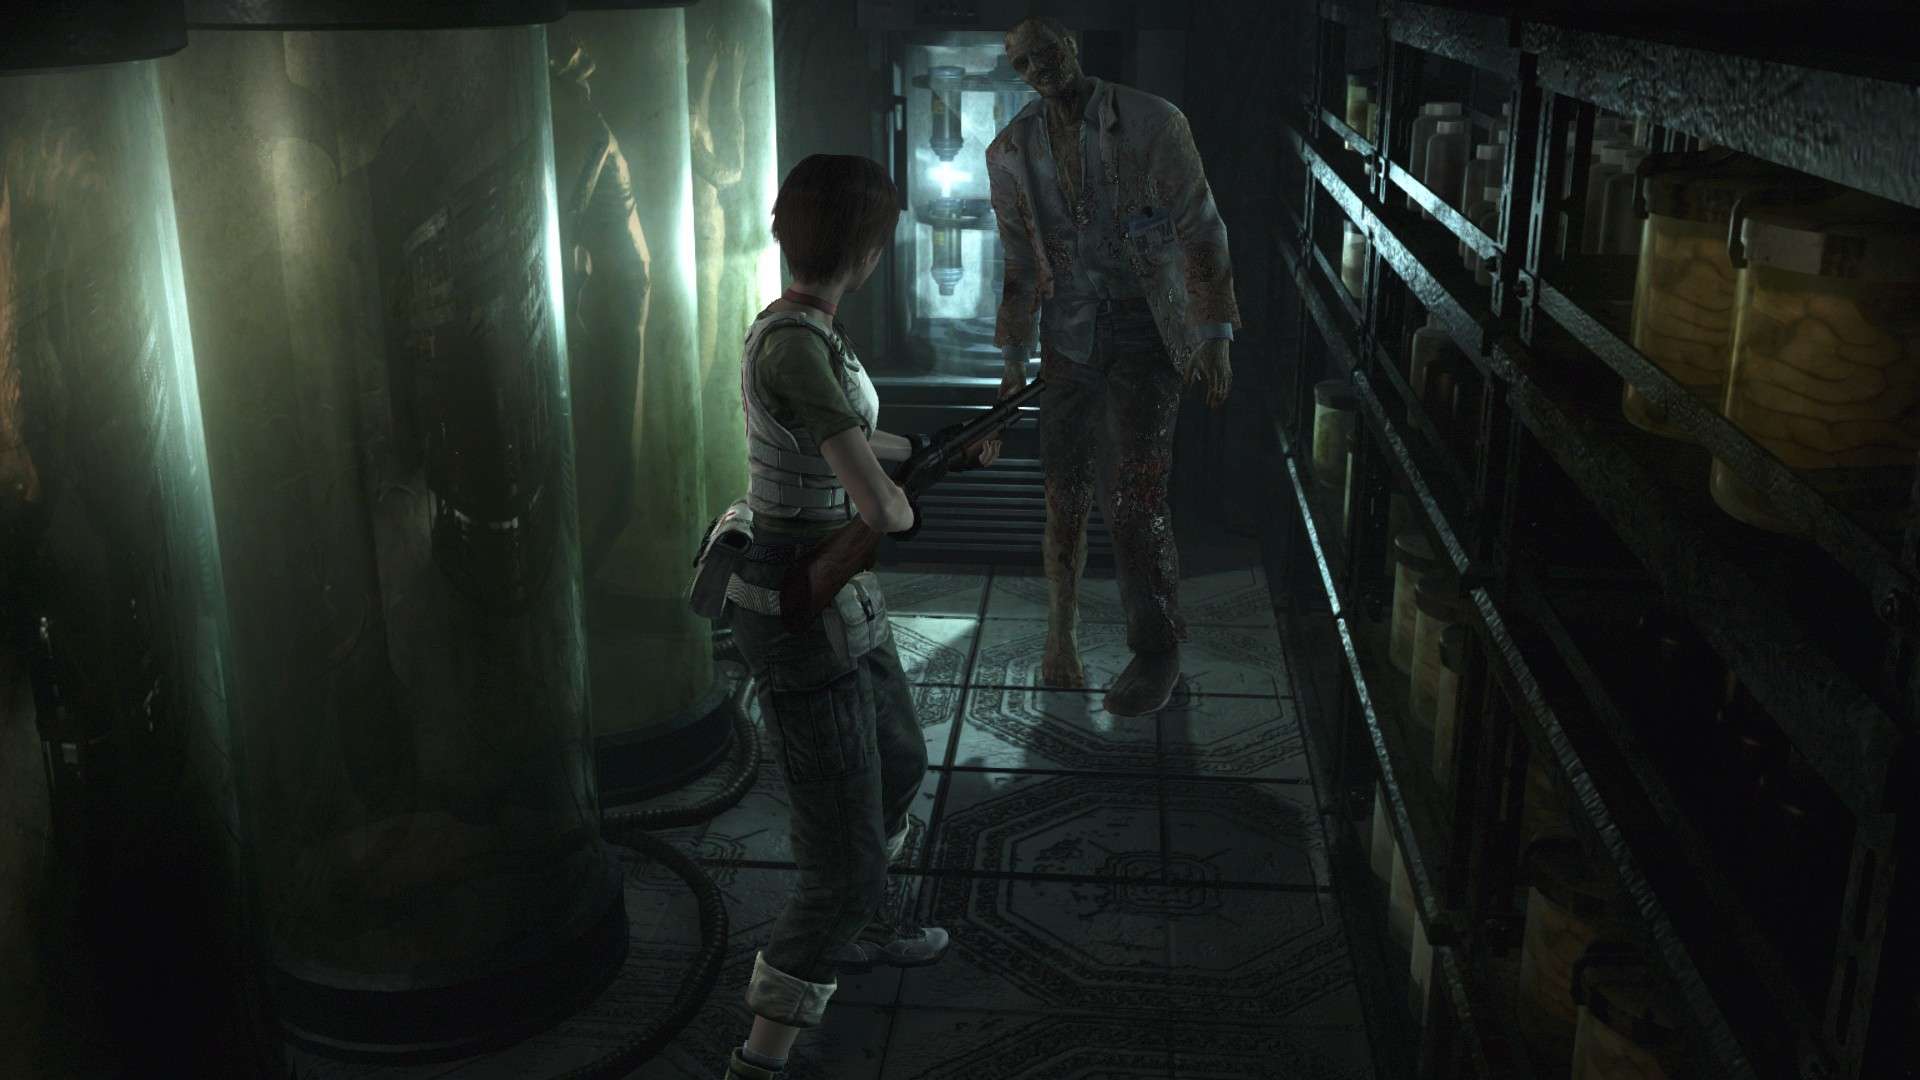 Rebecca facing a zombie in the lab.